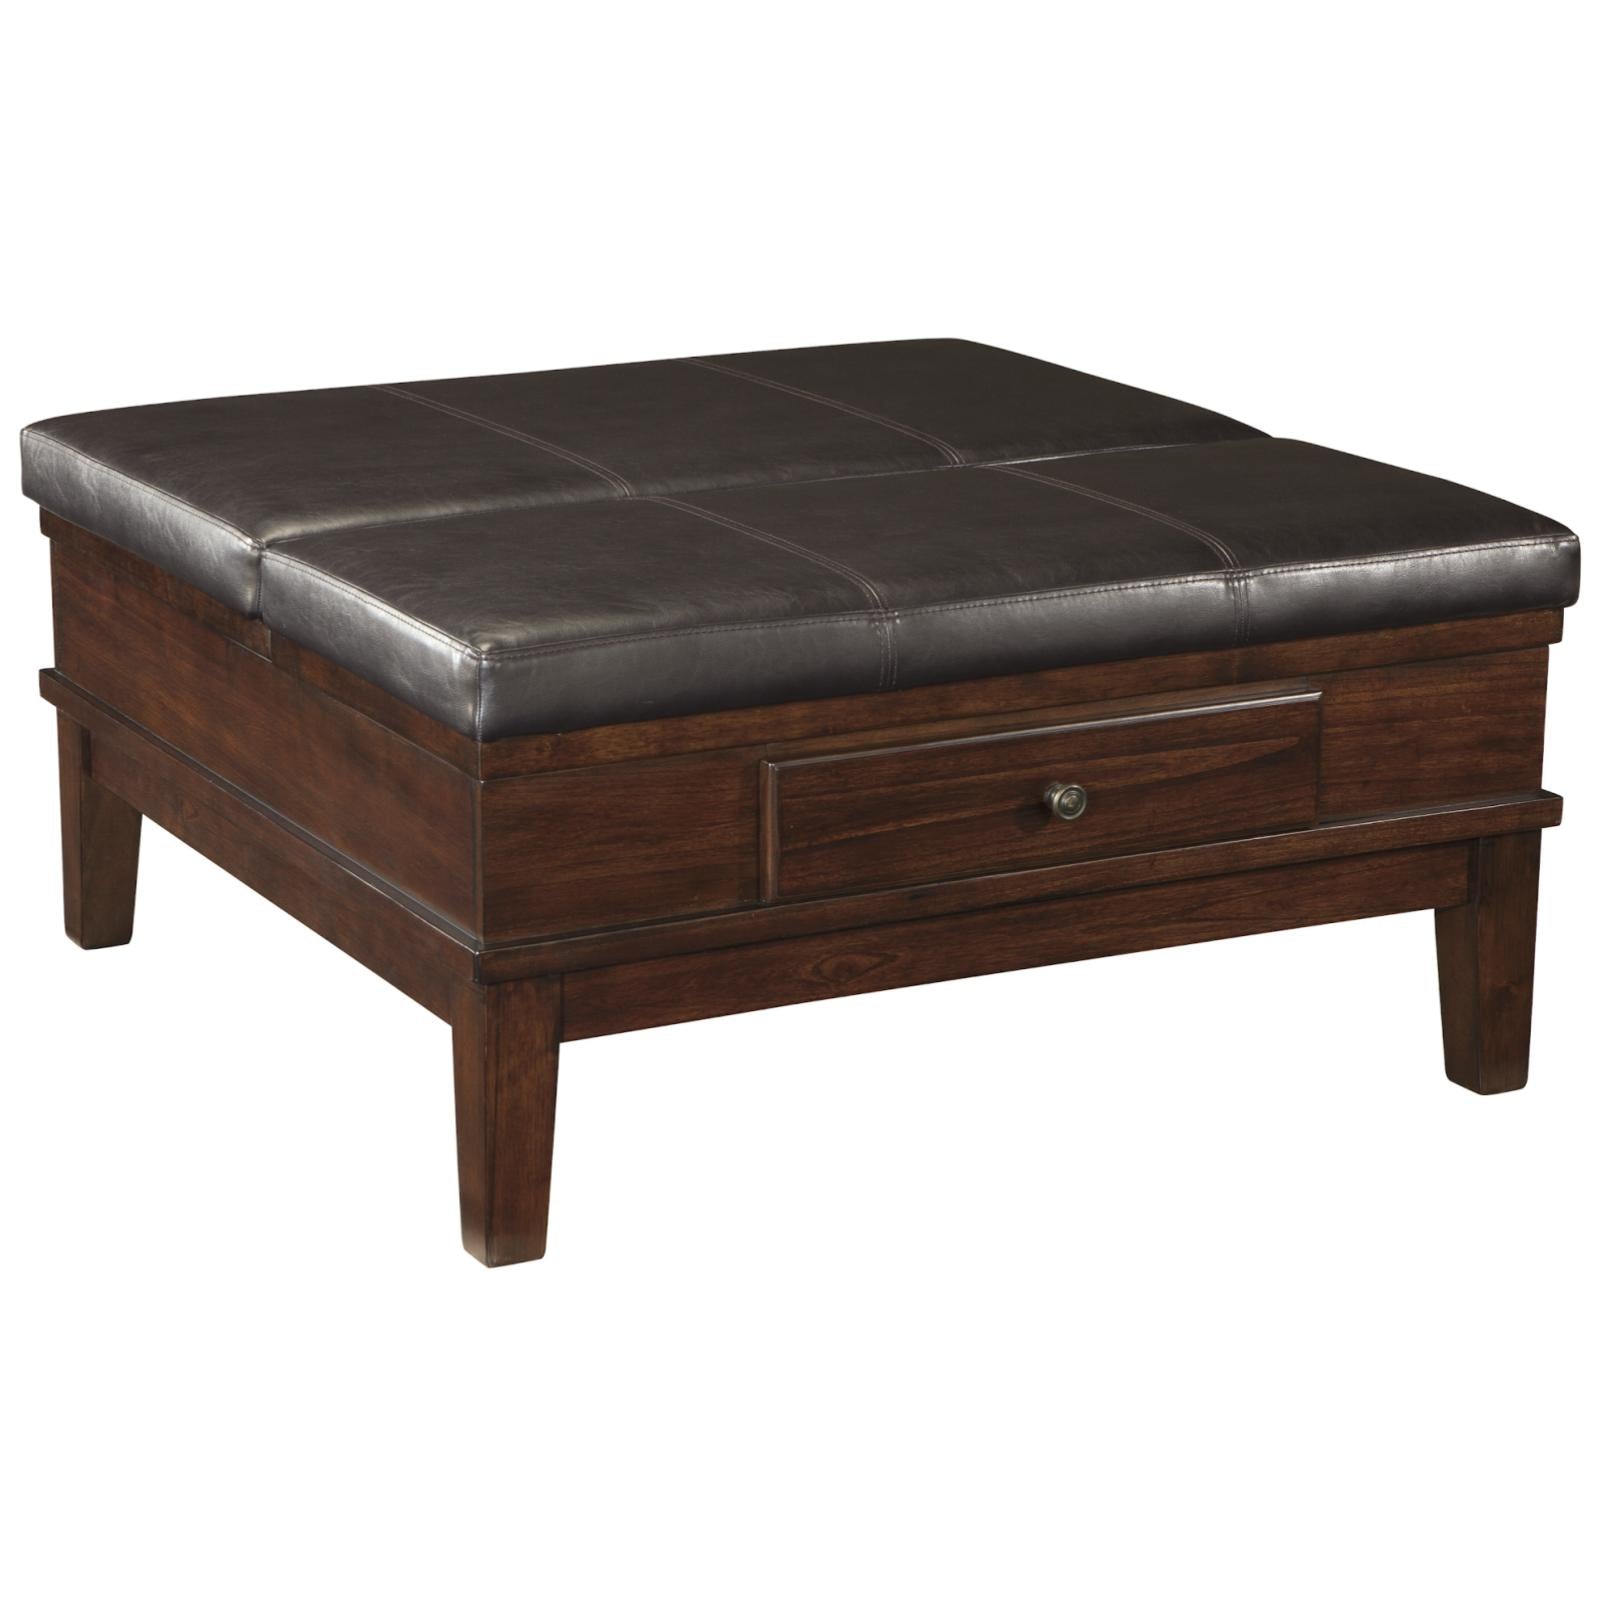 Gately Lift-Up Ottoman Cocktail Table